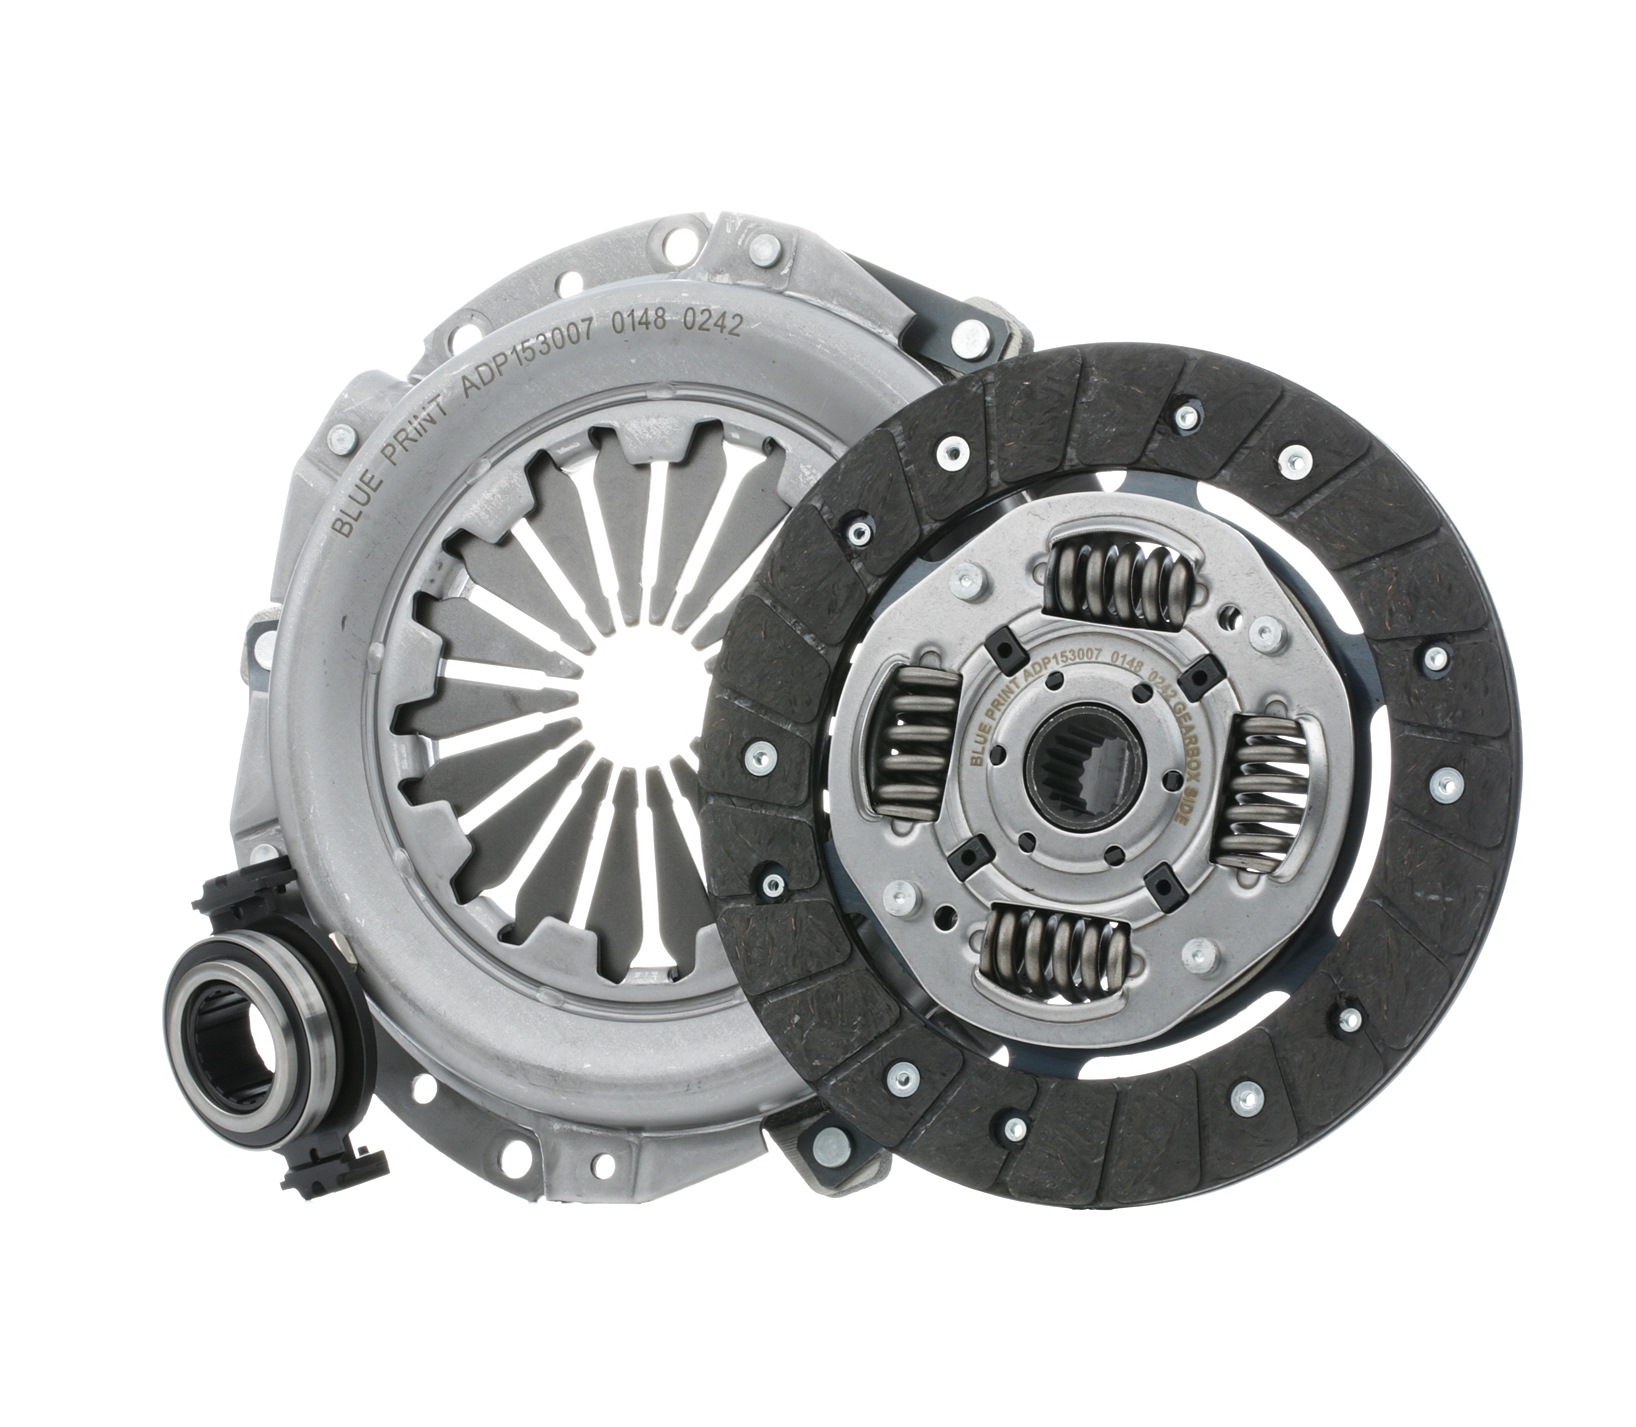 BLUE PRINT ADP153007 Clutch kit JEEP experience and price